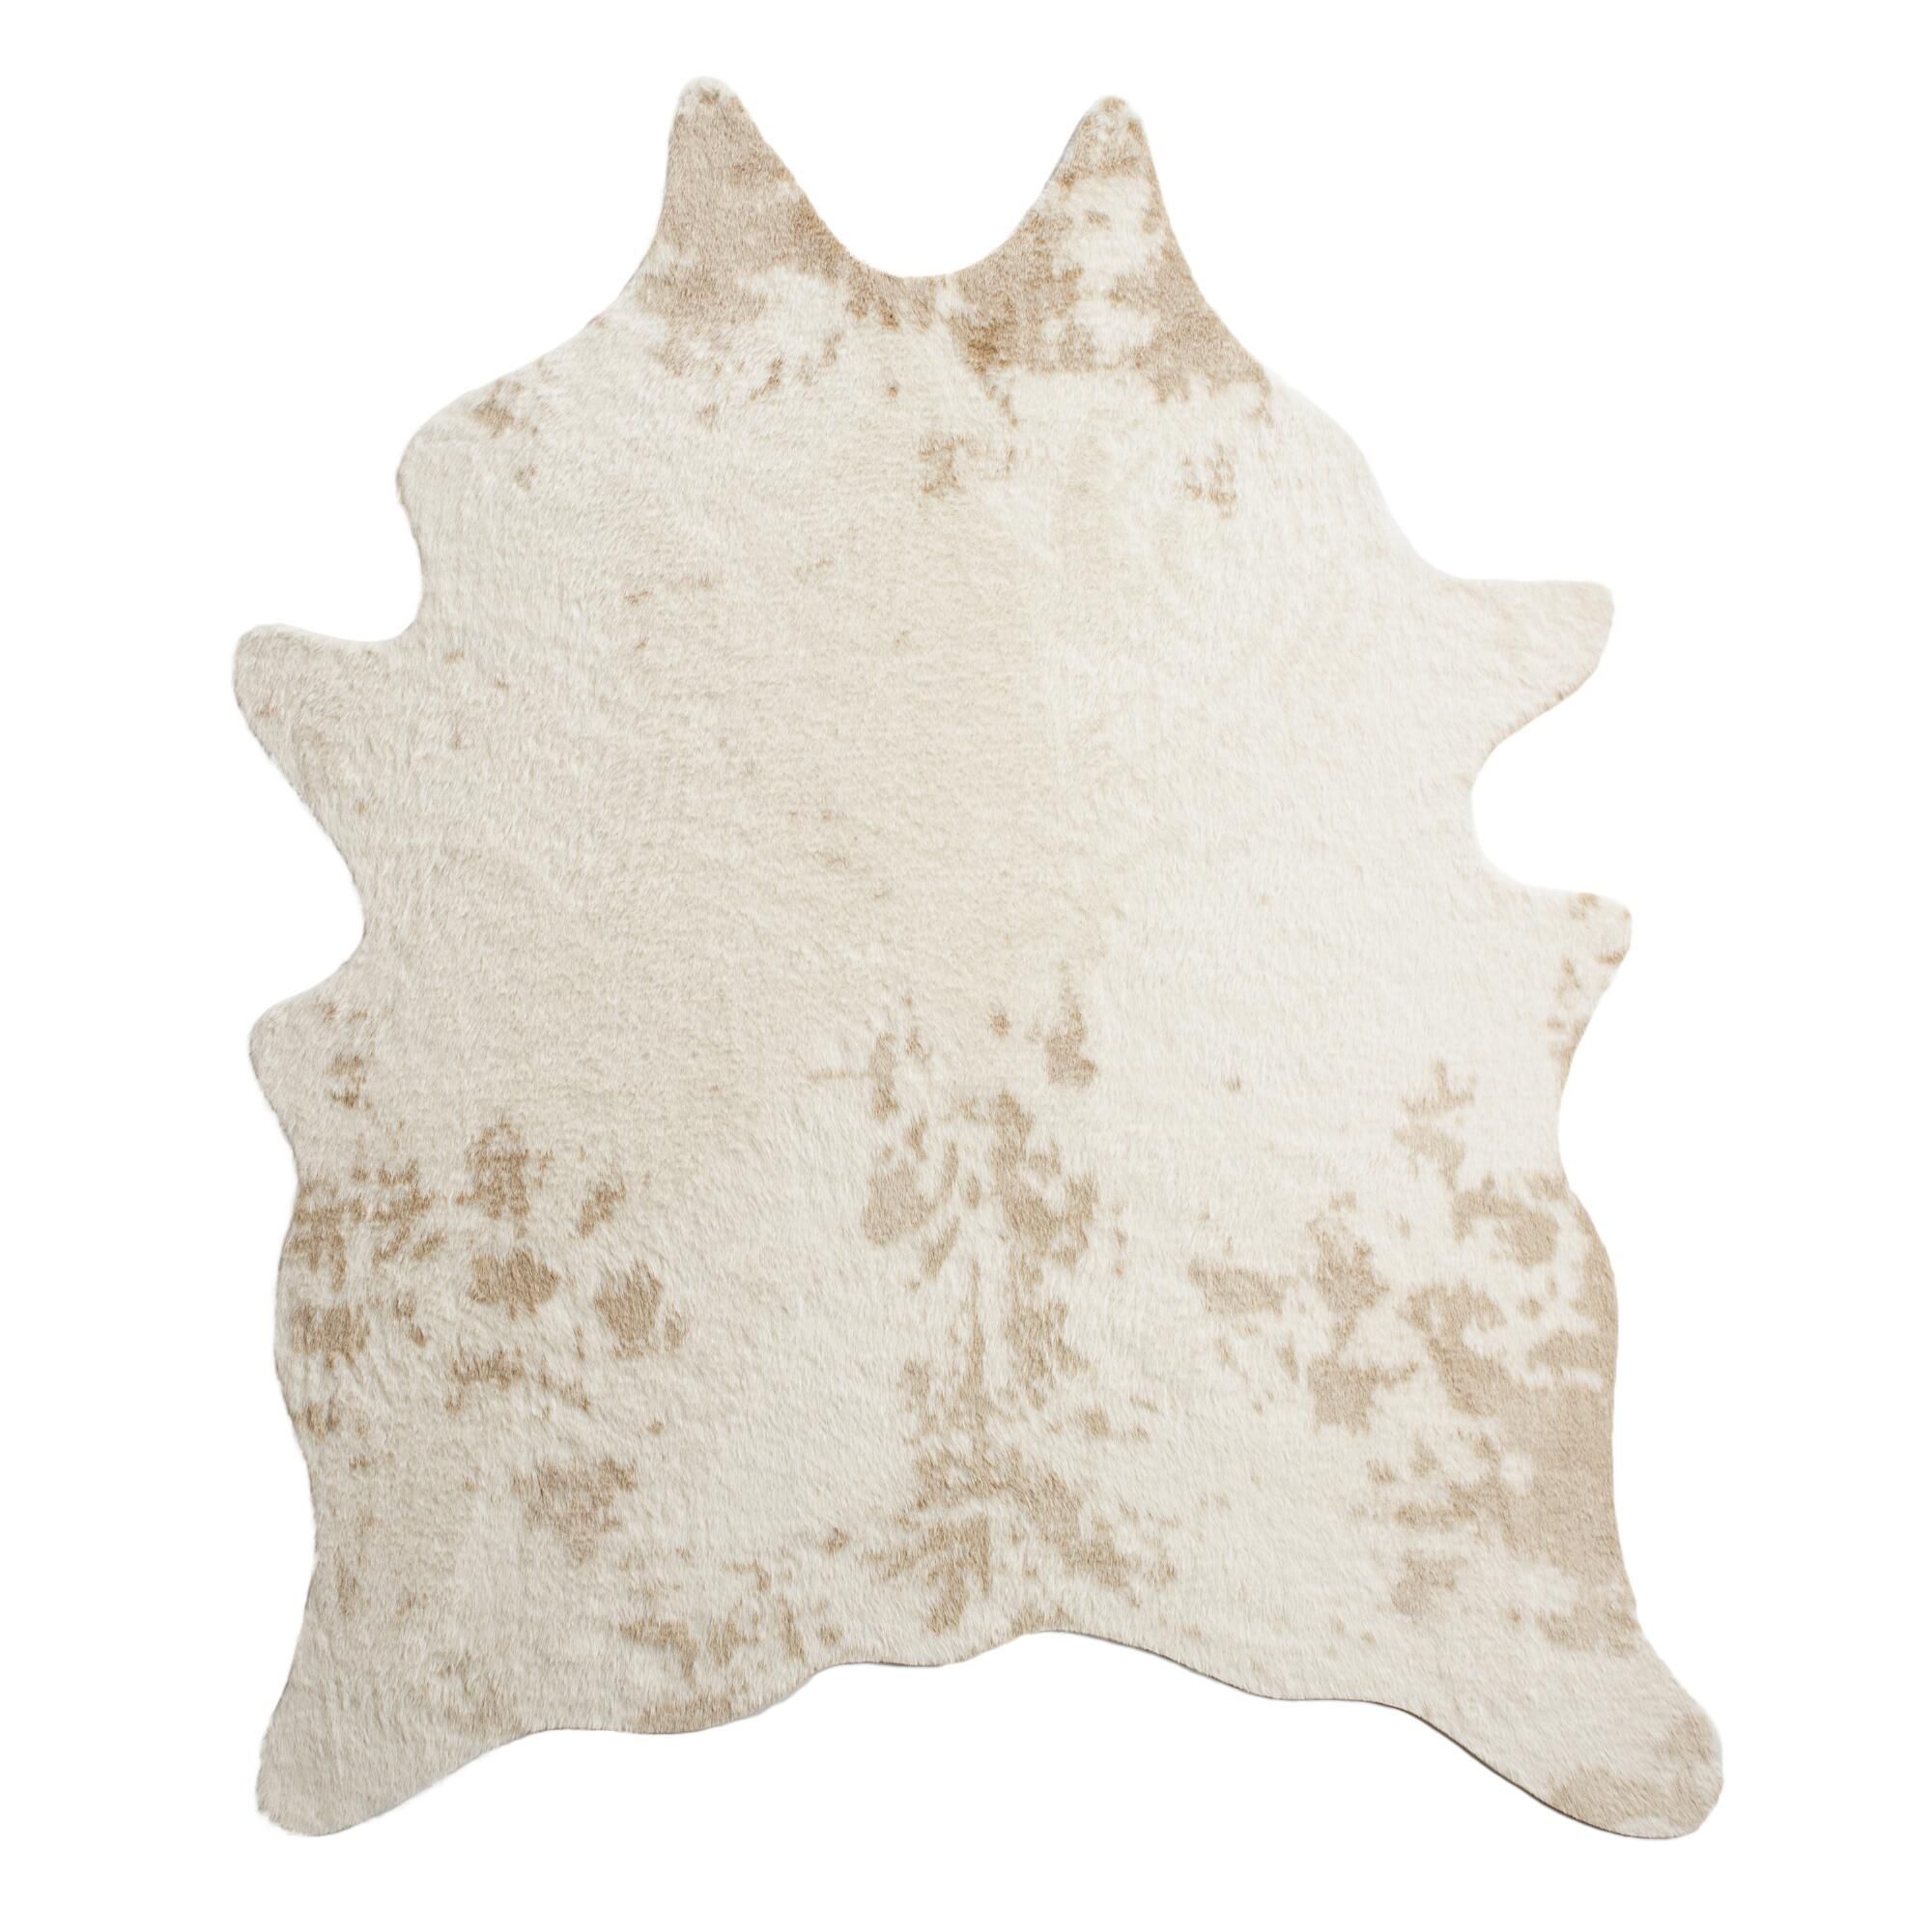 Ivory Printed Faux Cowhide Area Rug: White - 6Ftx8Ft by World Market 6Ftx8Ft | World Market